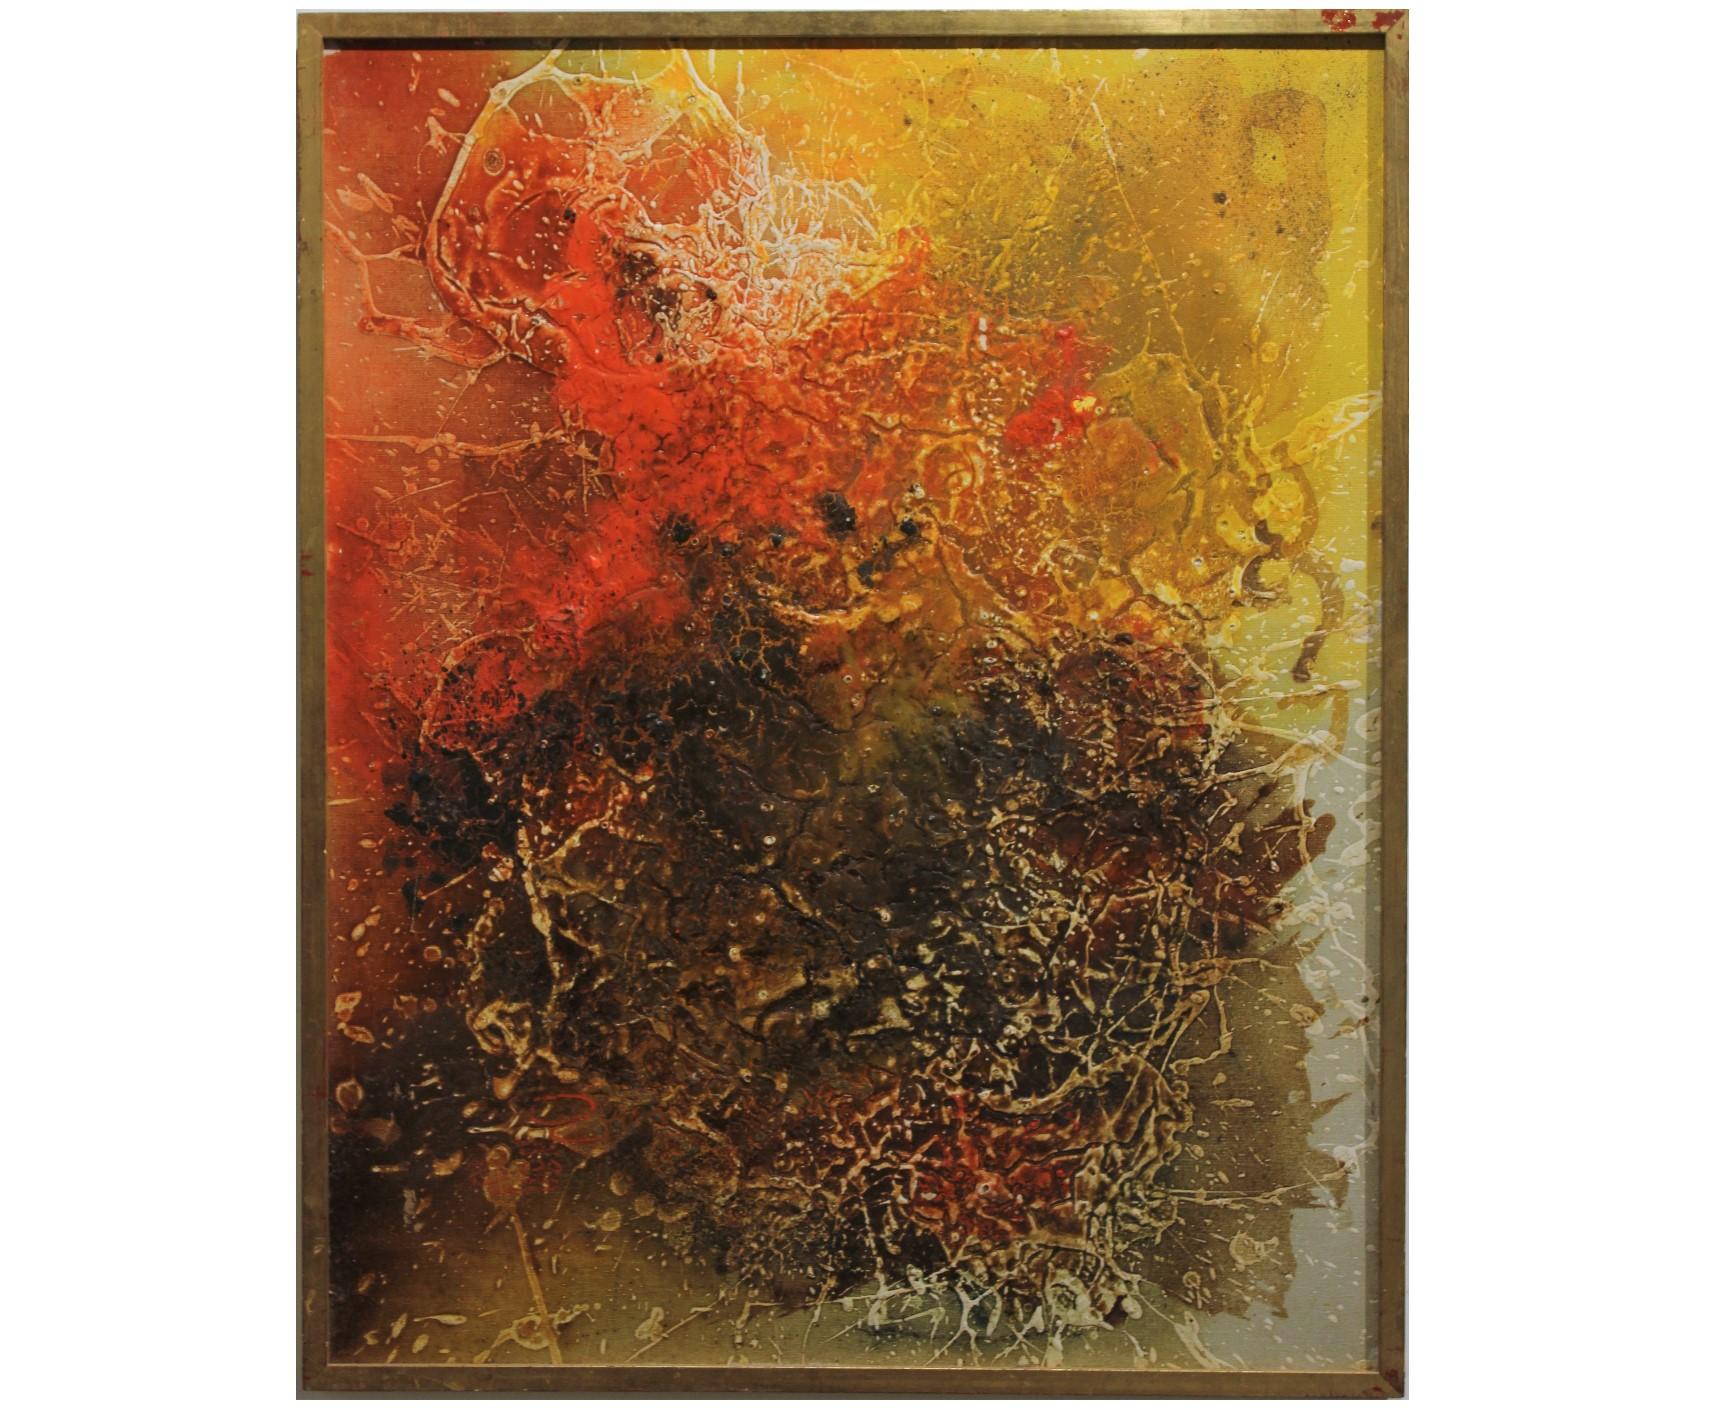 Modern Textured Yellow with Orange Abstract Expressionist - Painting by Unknown